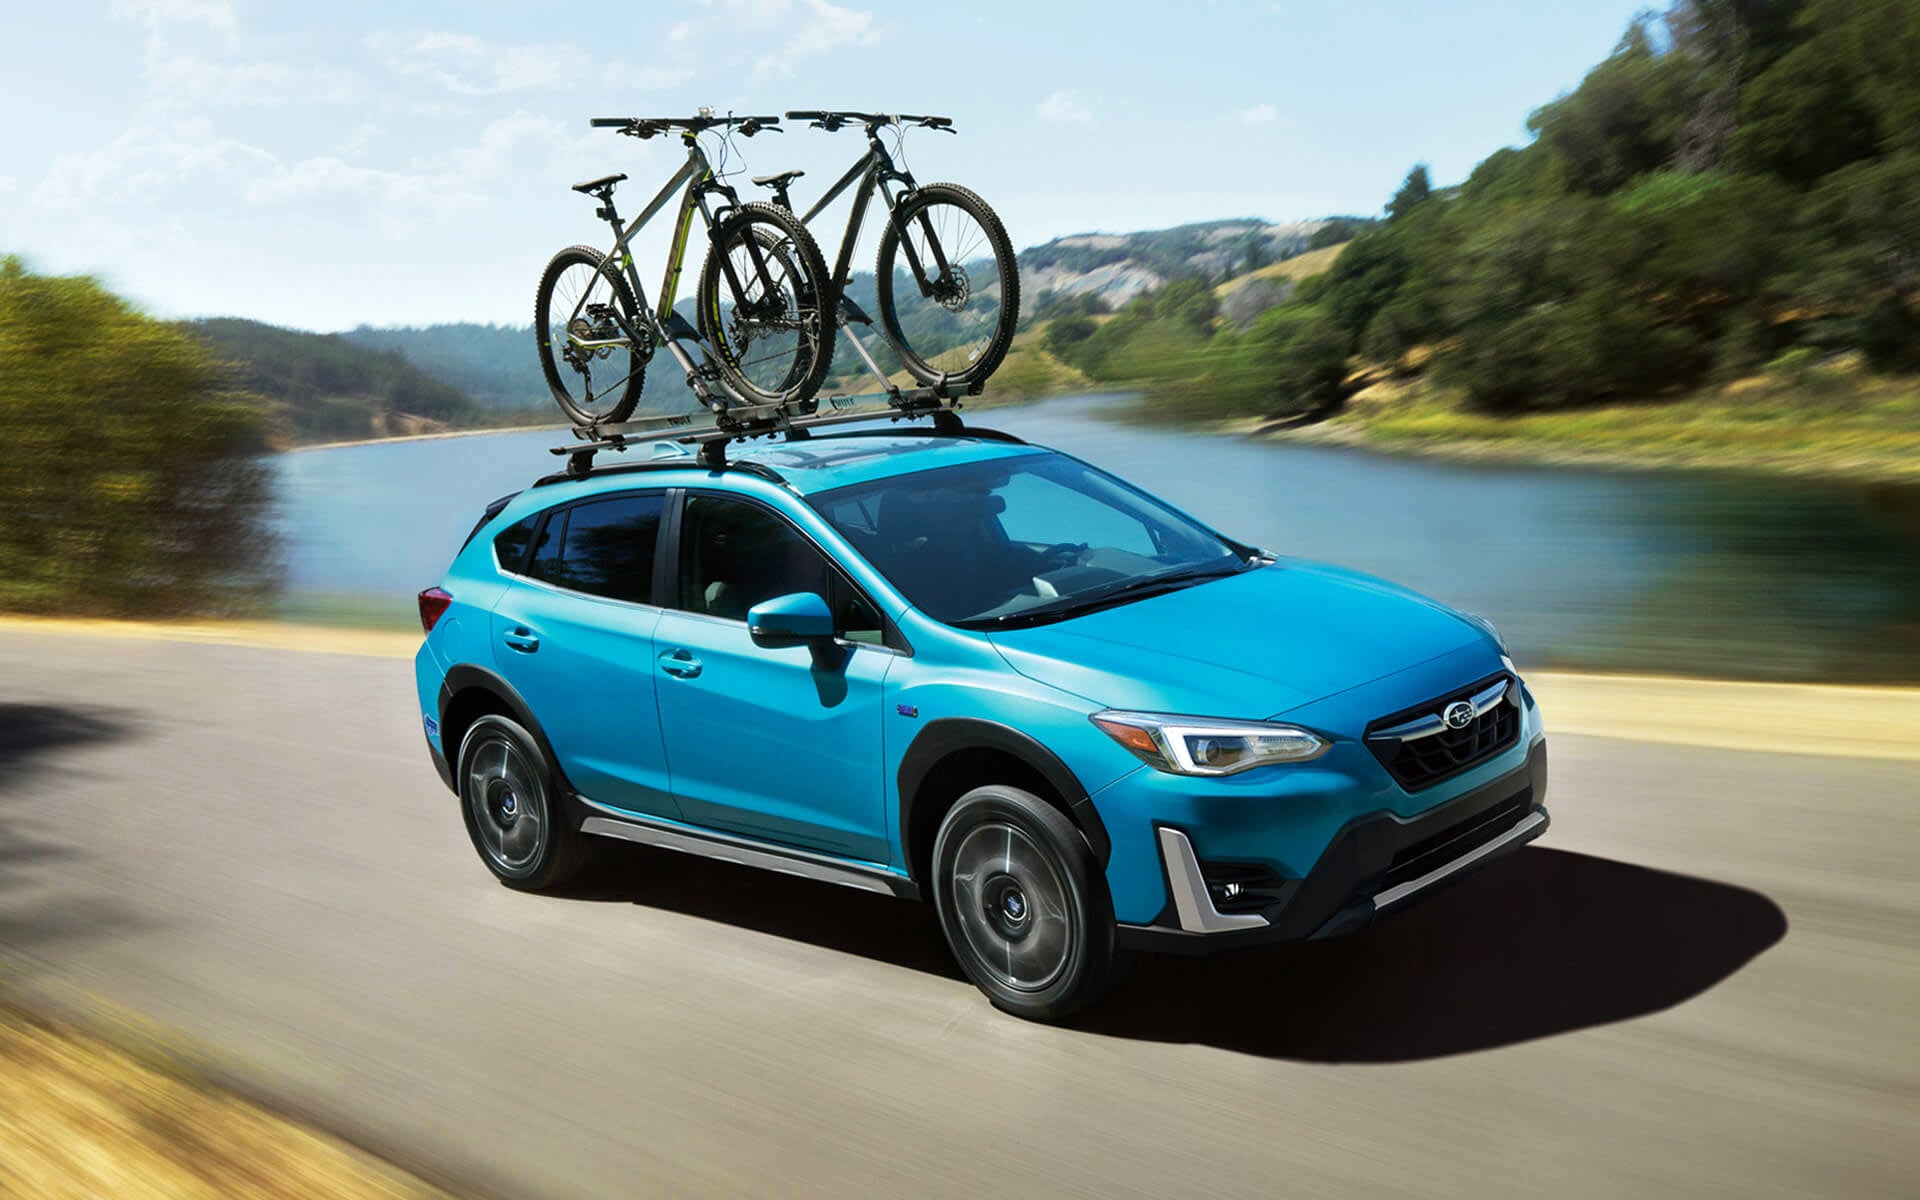 A blue Crosstrek Hybrid with two bicycles on its roof rack driving beside a river | Tindol Subaru in Gastonia NC